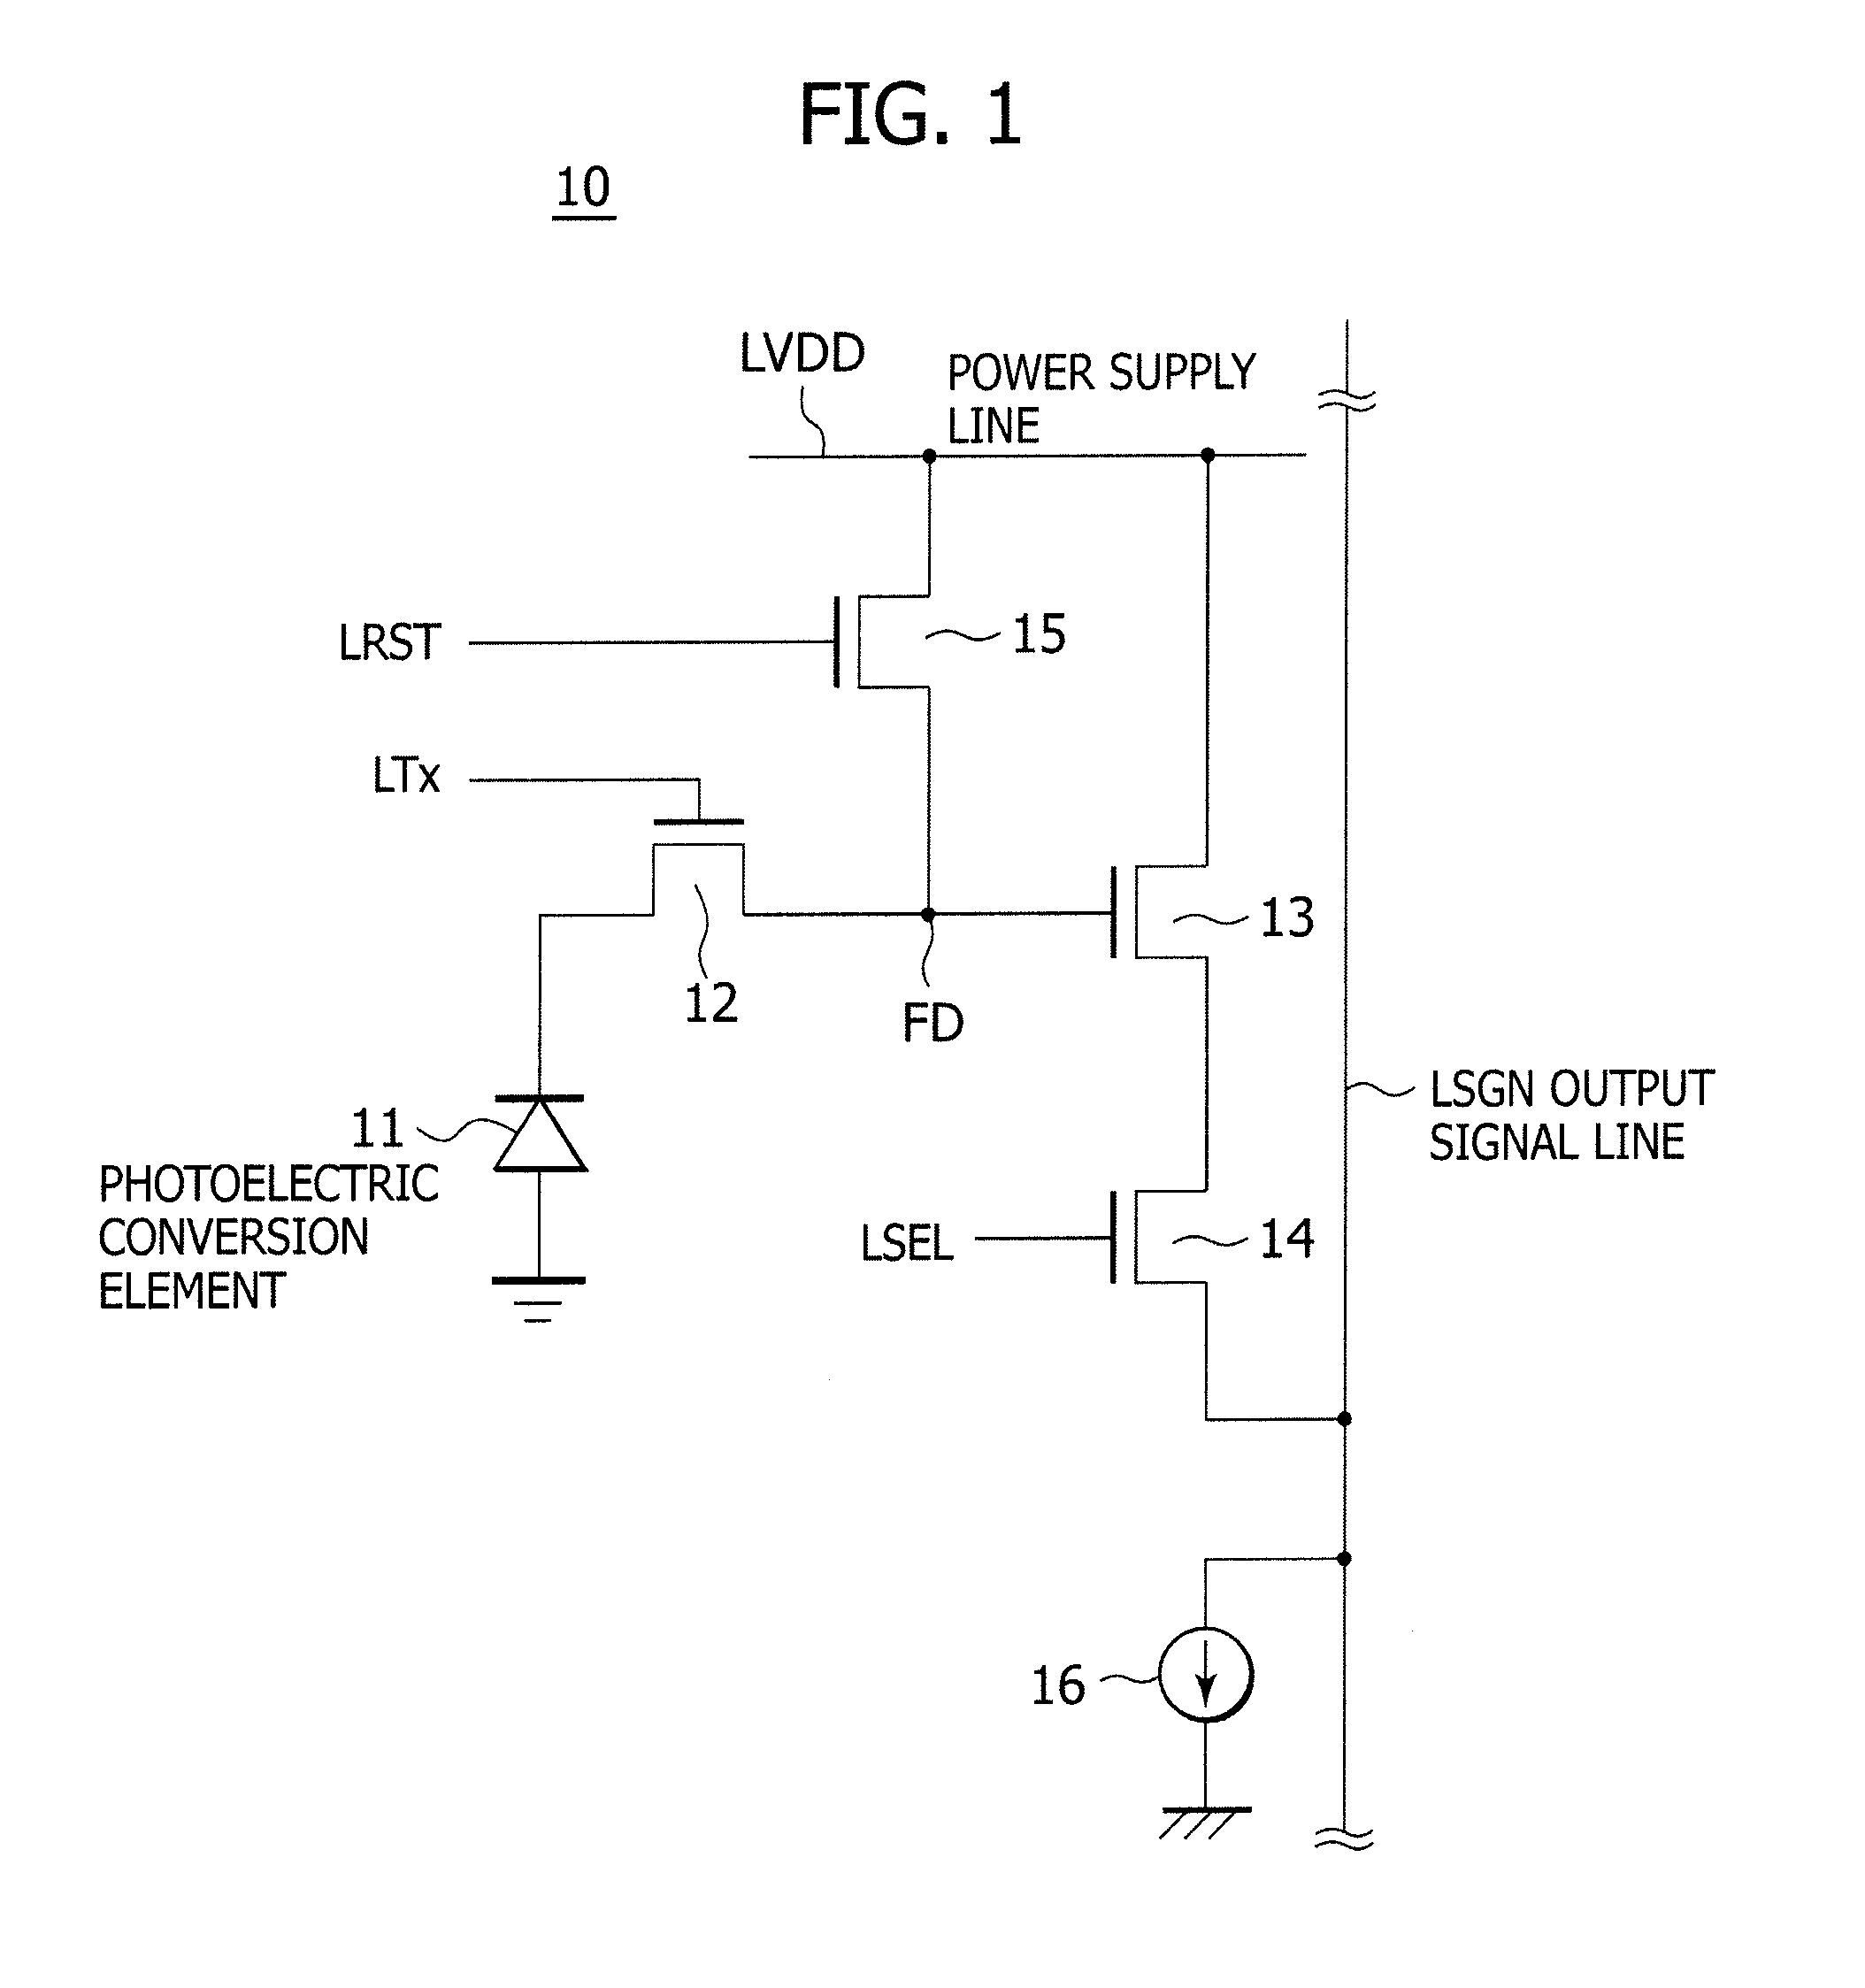 Solid state image pickup element and camera system